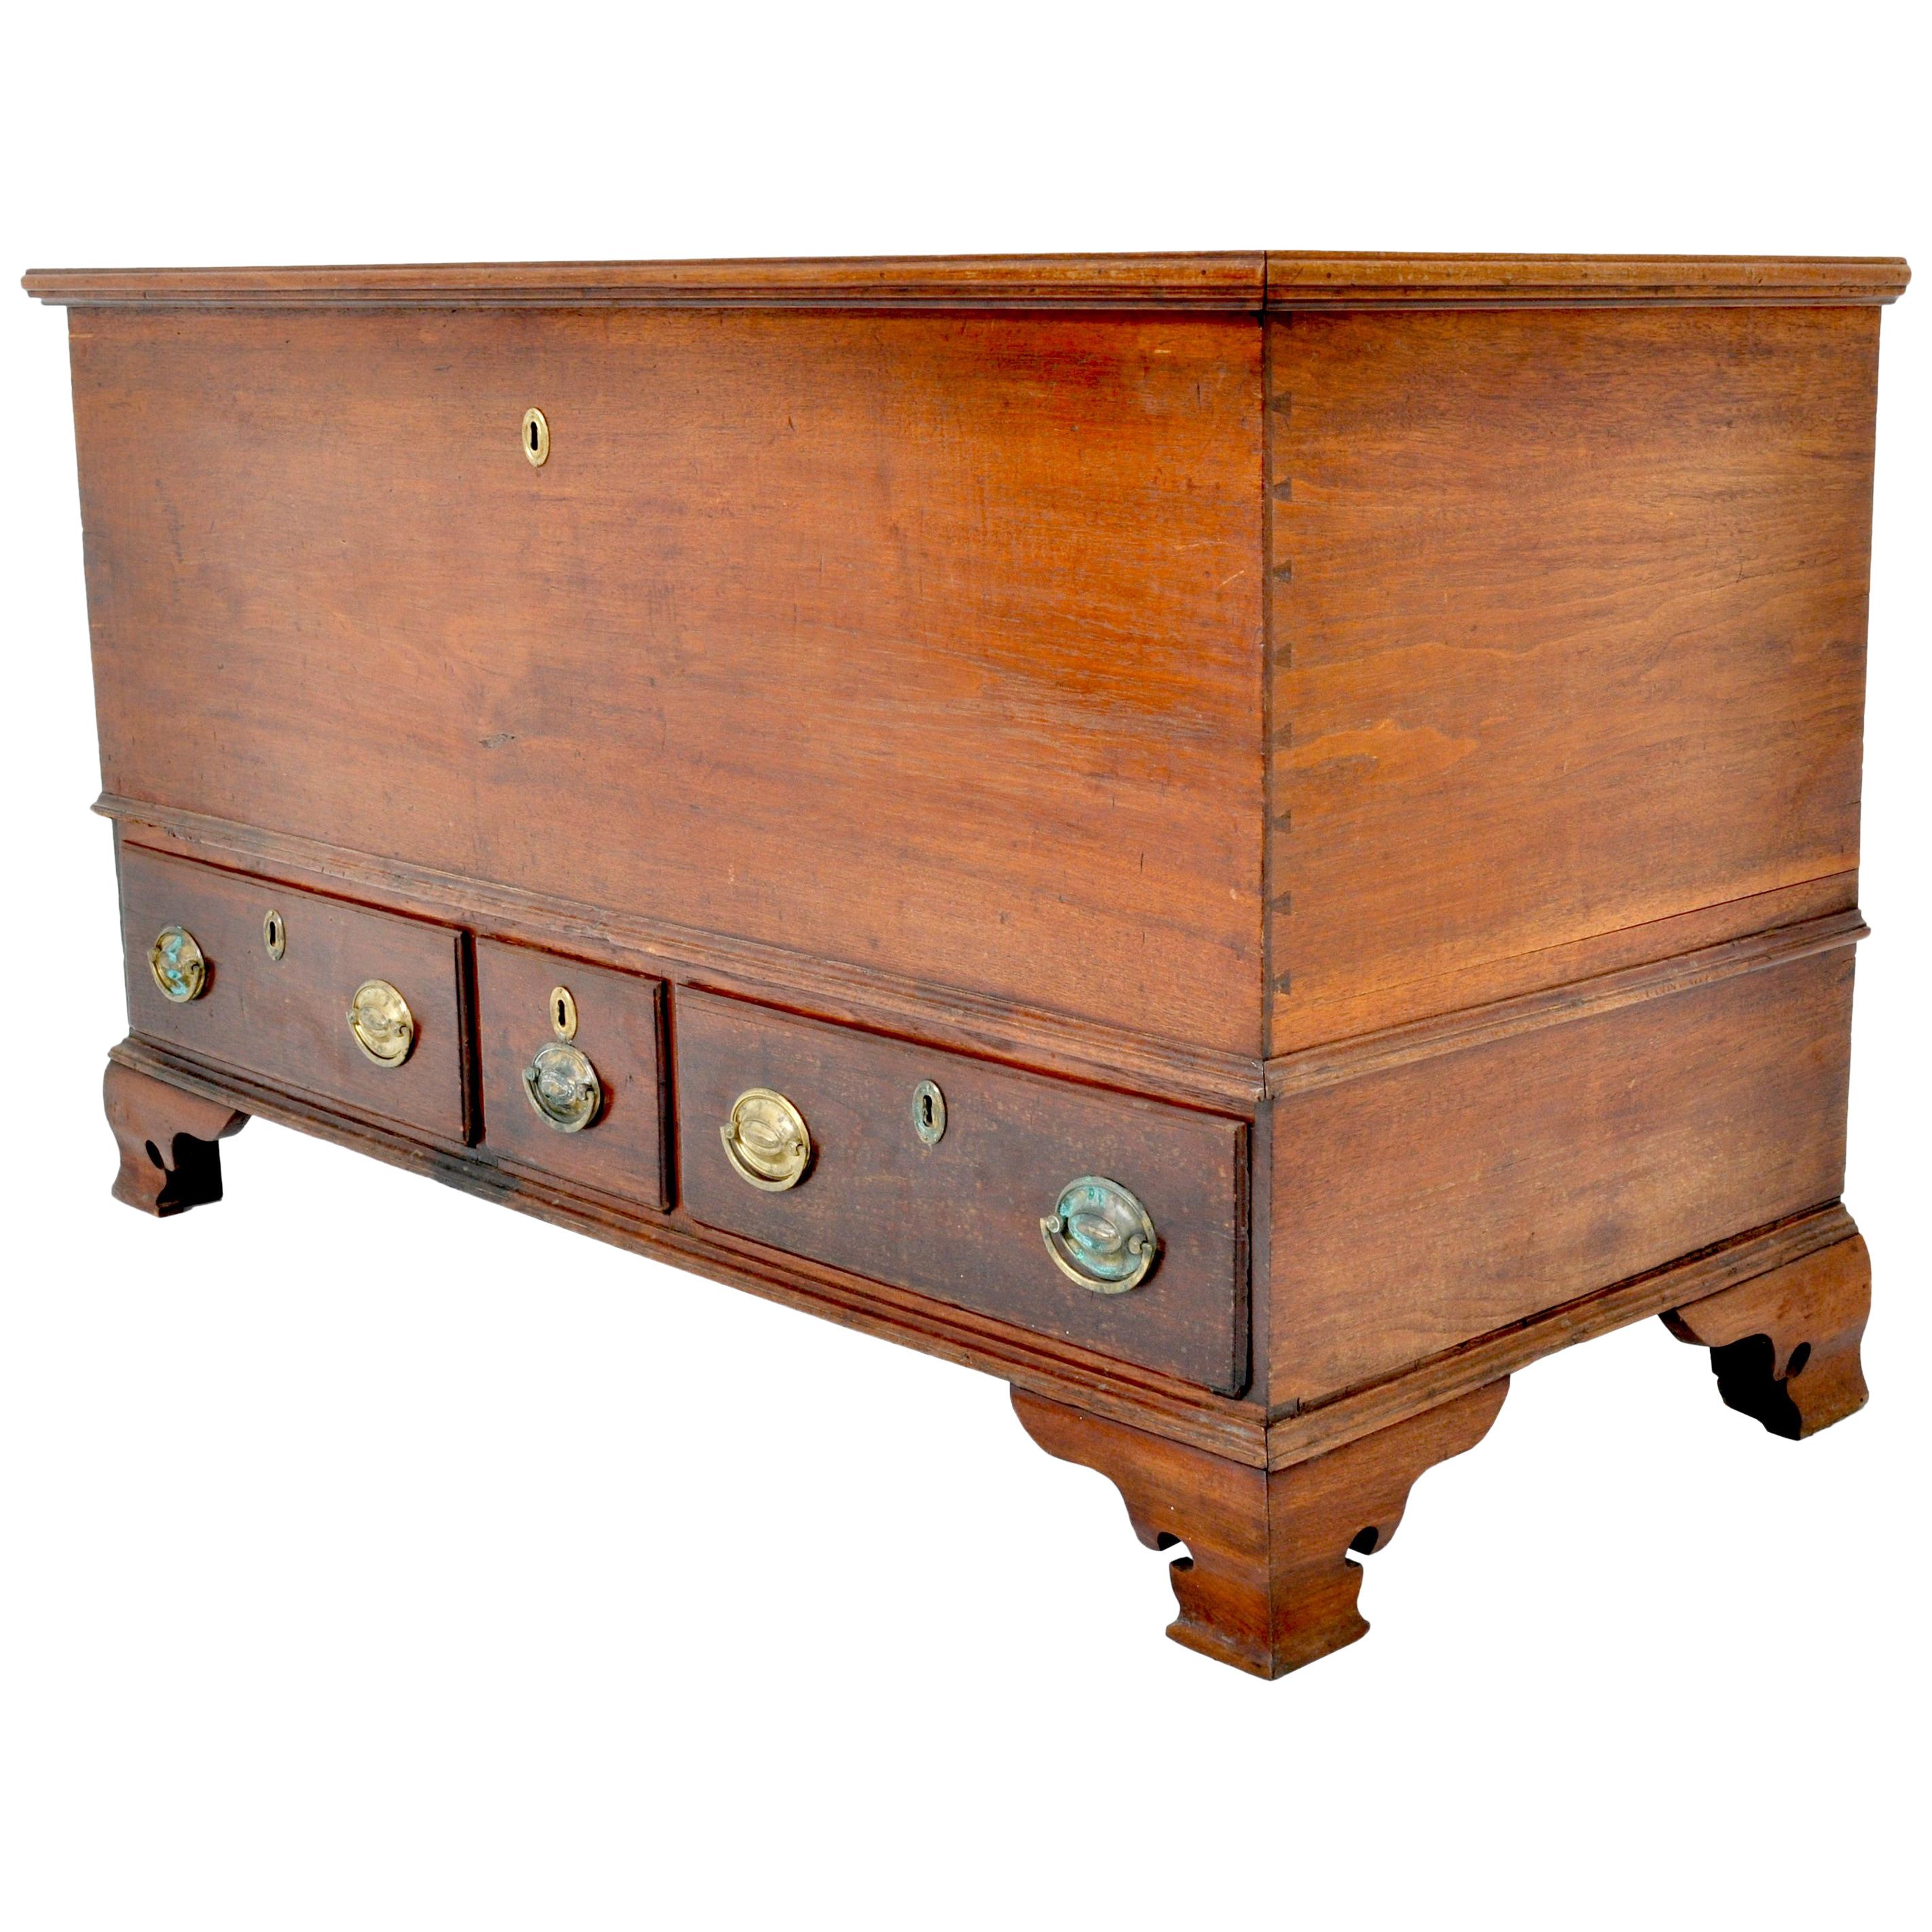 Antique American Federal Period Chippendale Cherry Mule Chest, Pennsylvania 1780